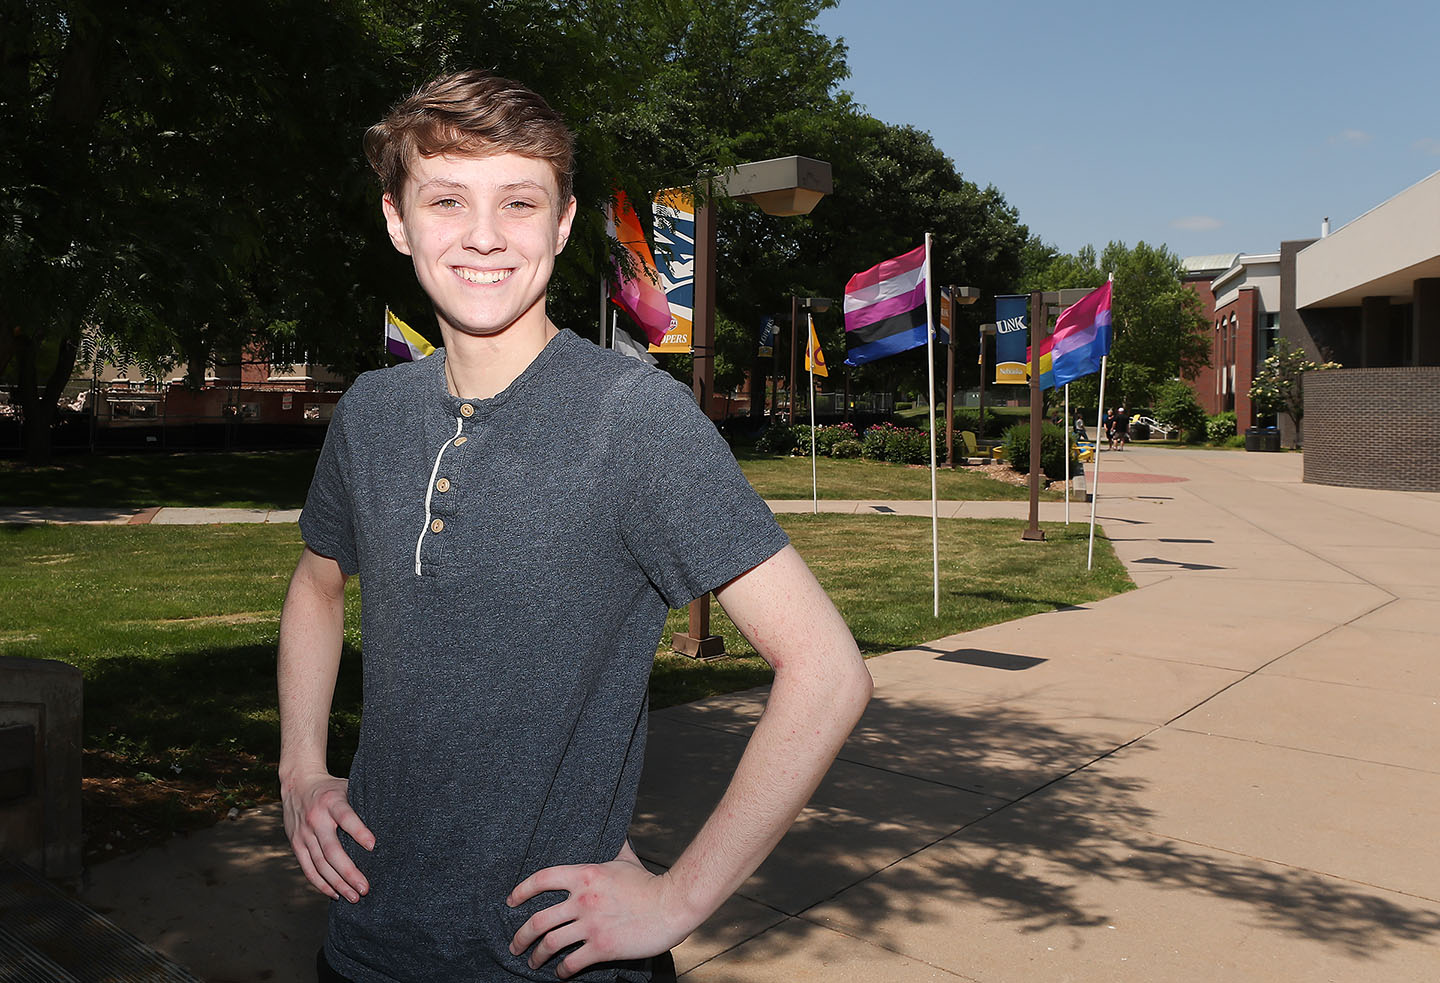 UNK sophomore Ryan Sikes serves as president of PRISM, a campus organization that promotes awareness of the LGBTQIA+ community and provides a safe, welcoming space for these students and their allies. (Photos by Erika Pritchard, UNK Communications)